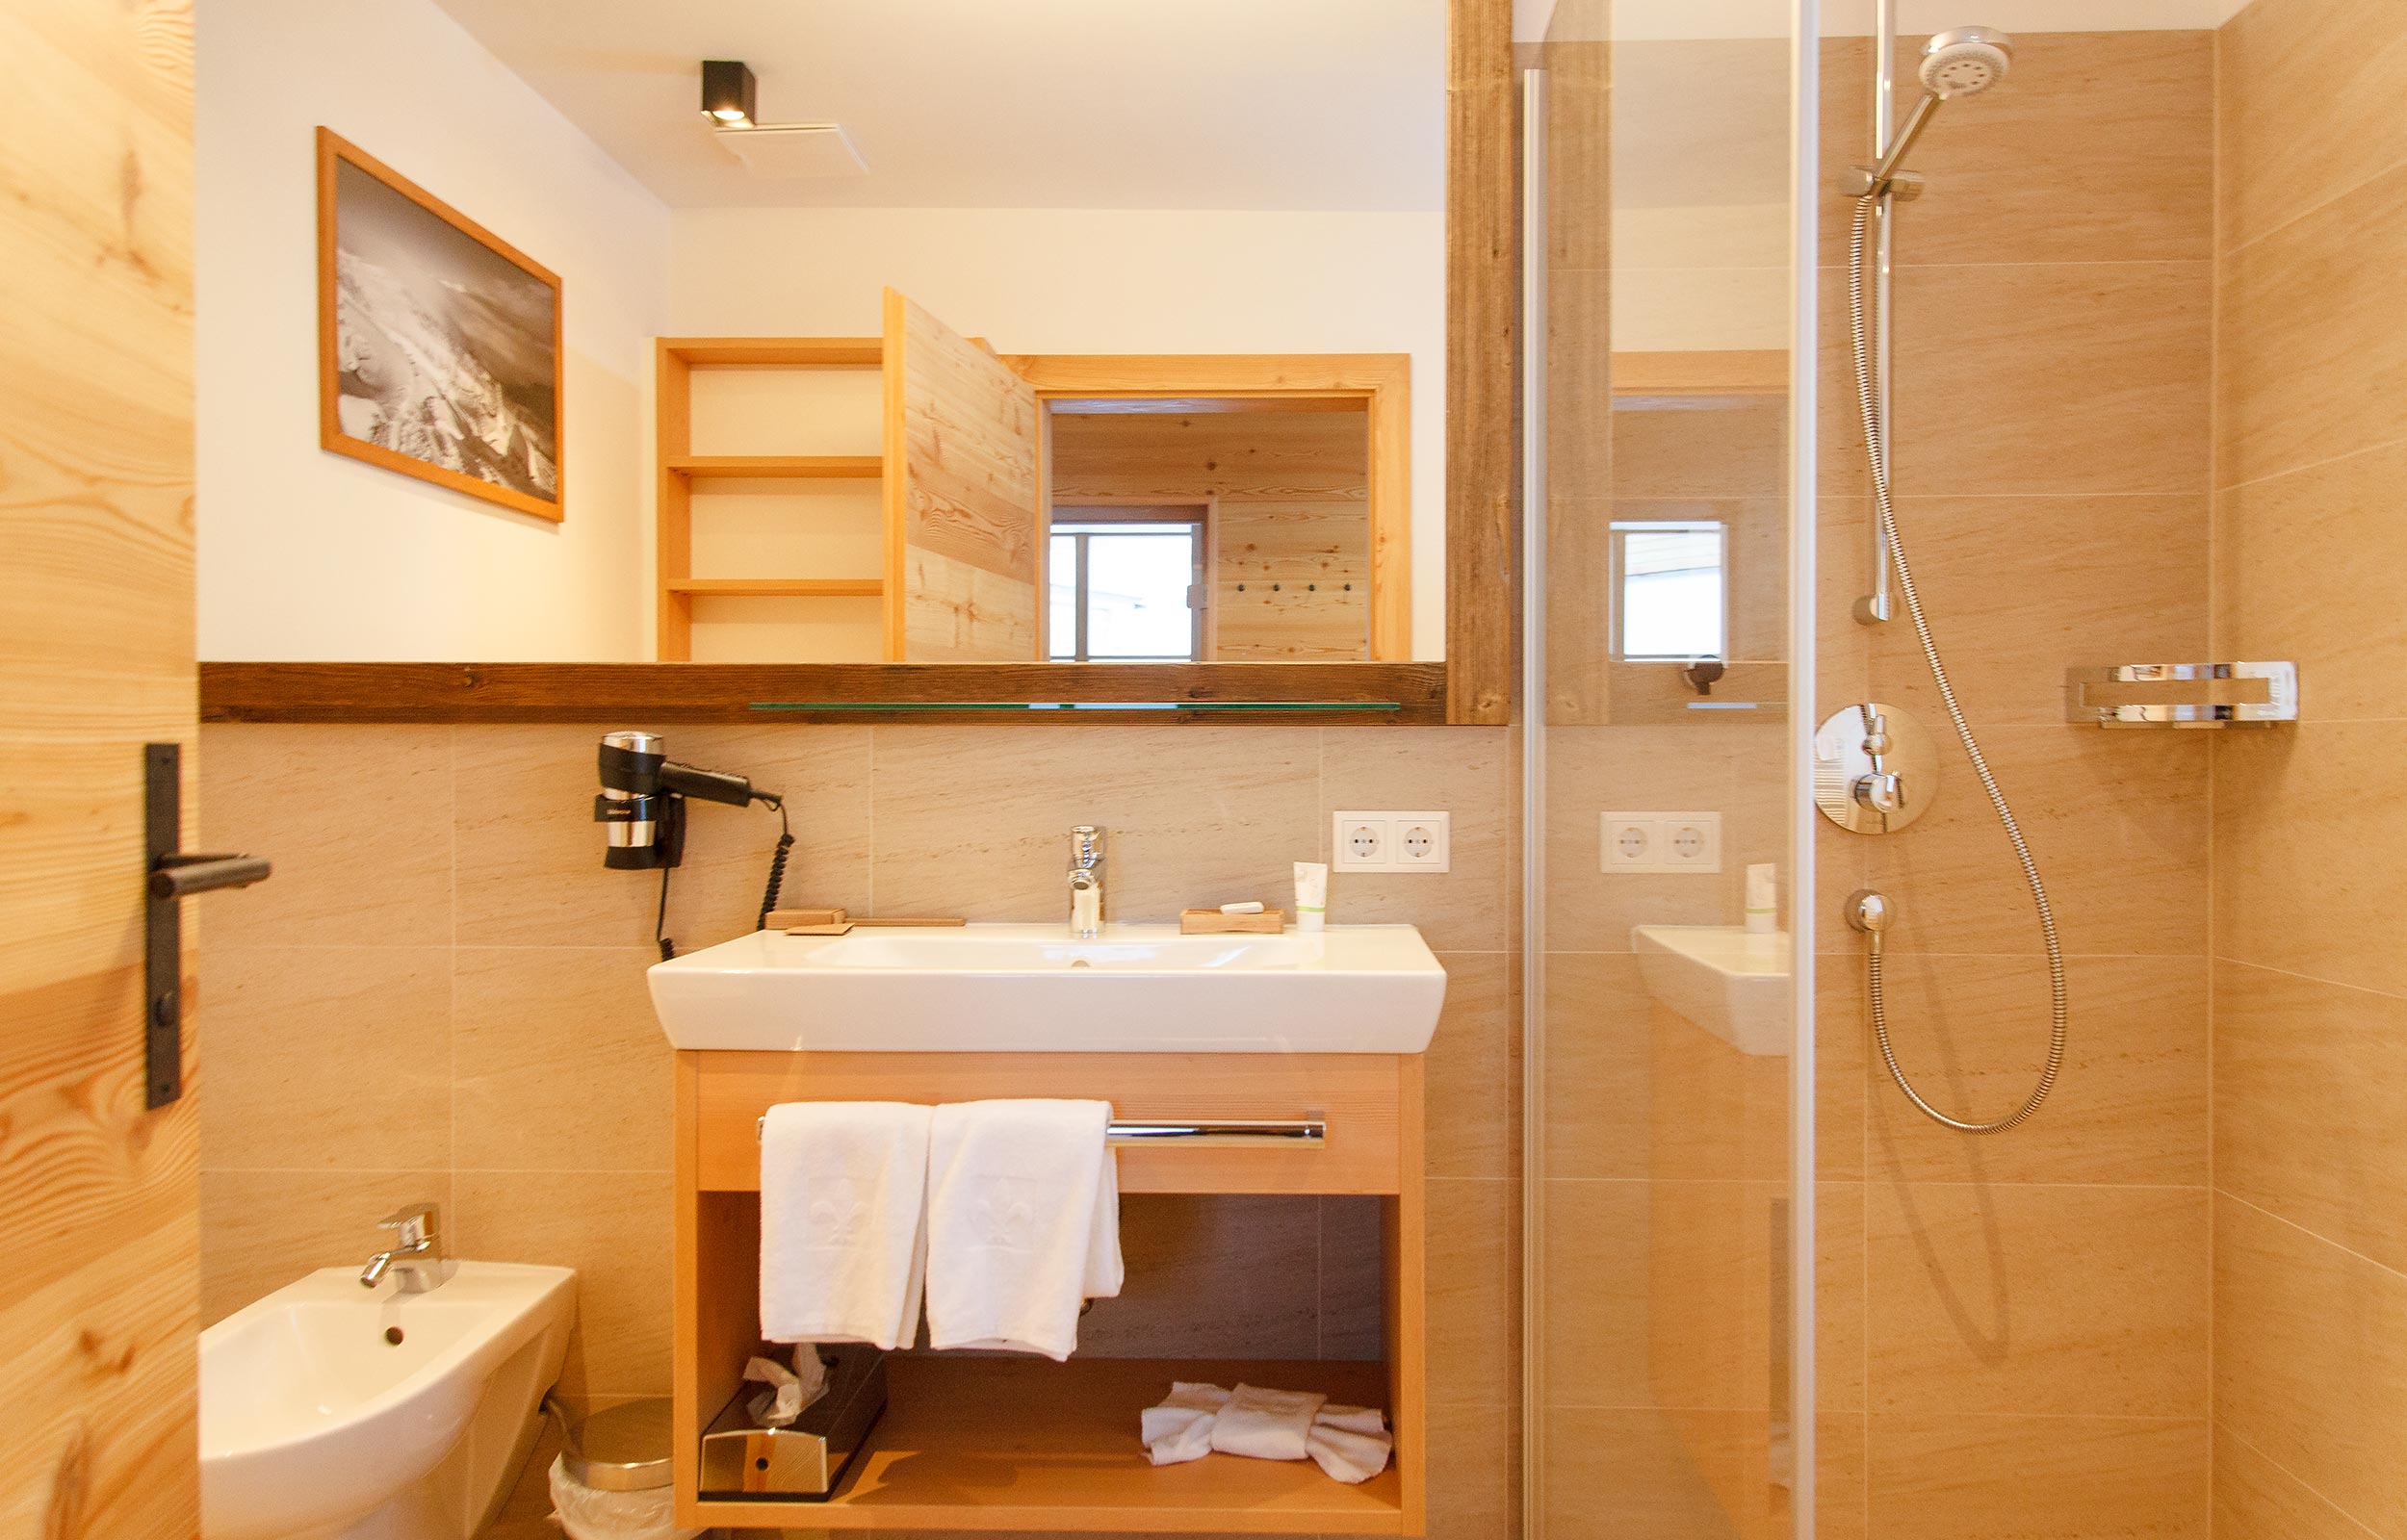 A fully equipped bathroom in the chalet with shower, bidet and a sink